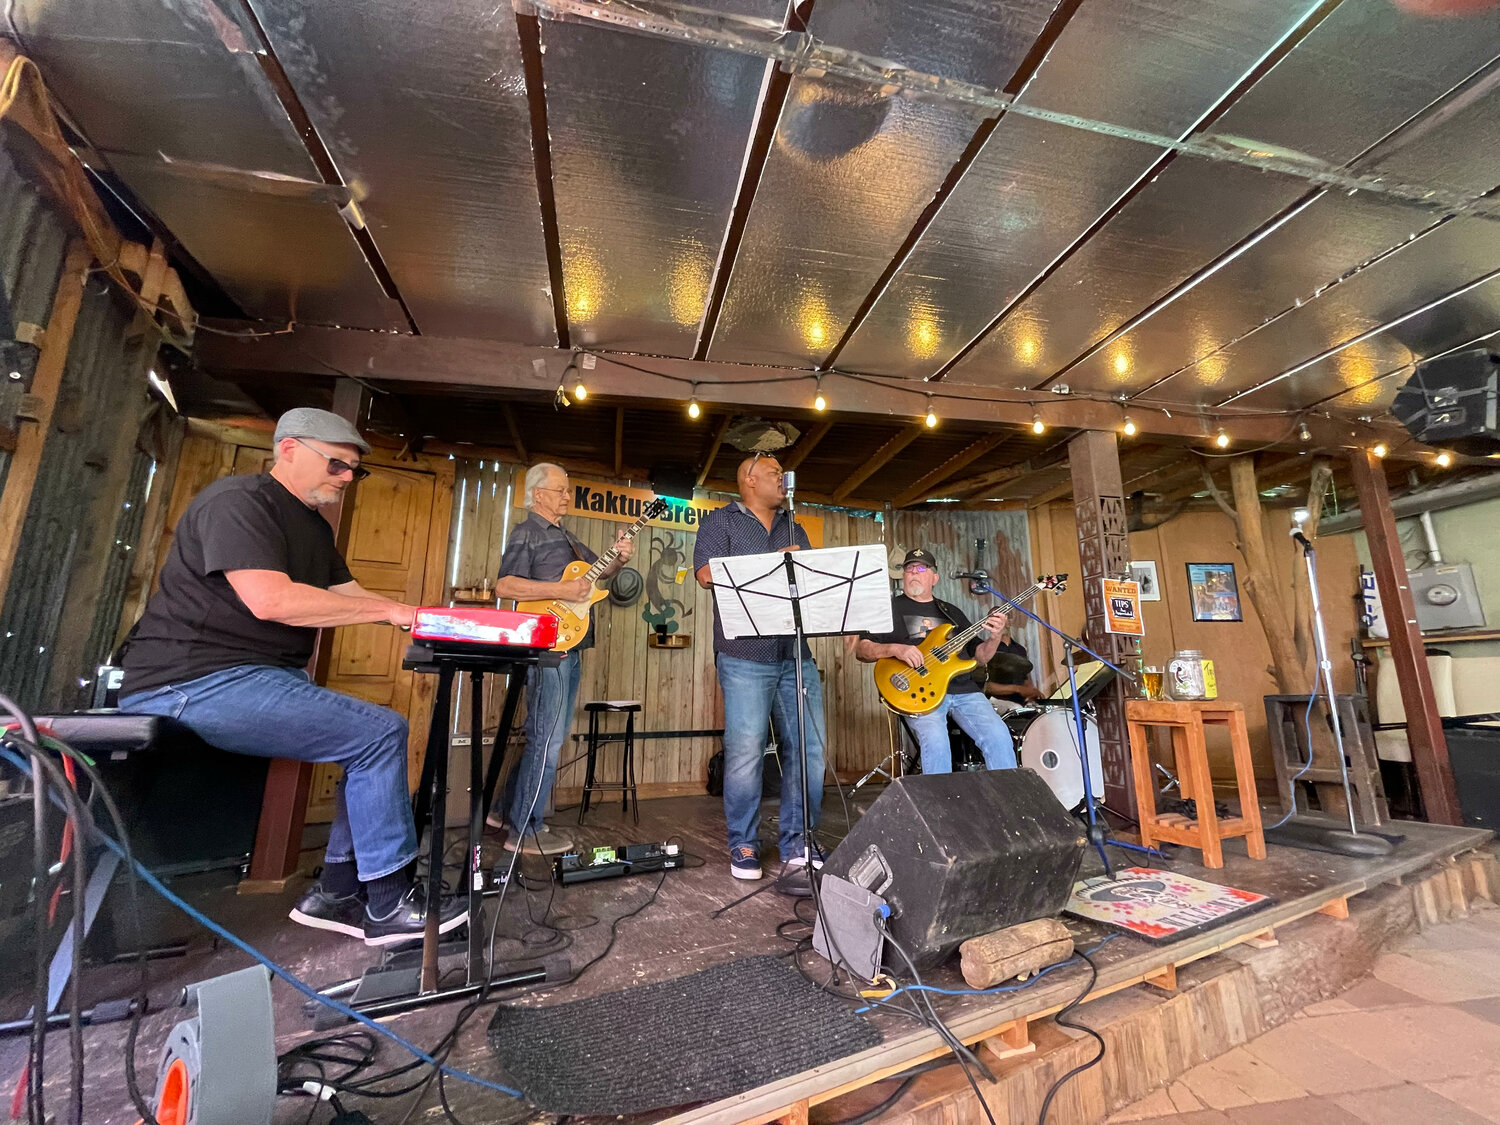 The Kaktus Kats are the house band at Kaktus Brewing in Bernalillo, hosting a blues show every Sunday afternoon. (T.S. Last/Sandoval Signpost)